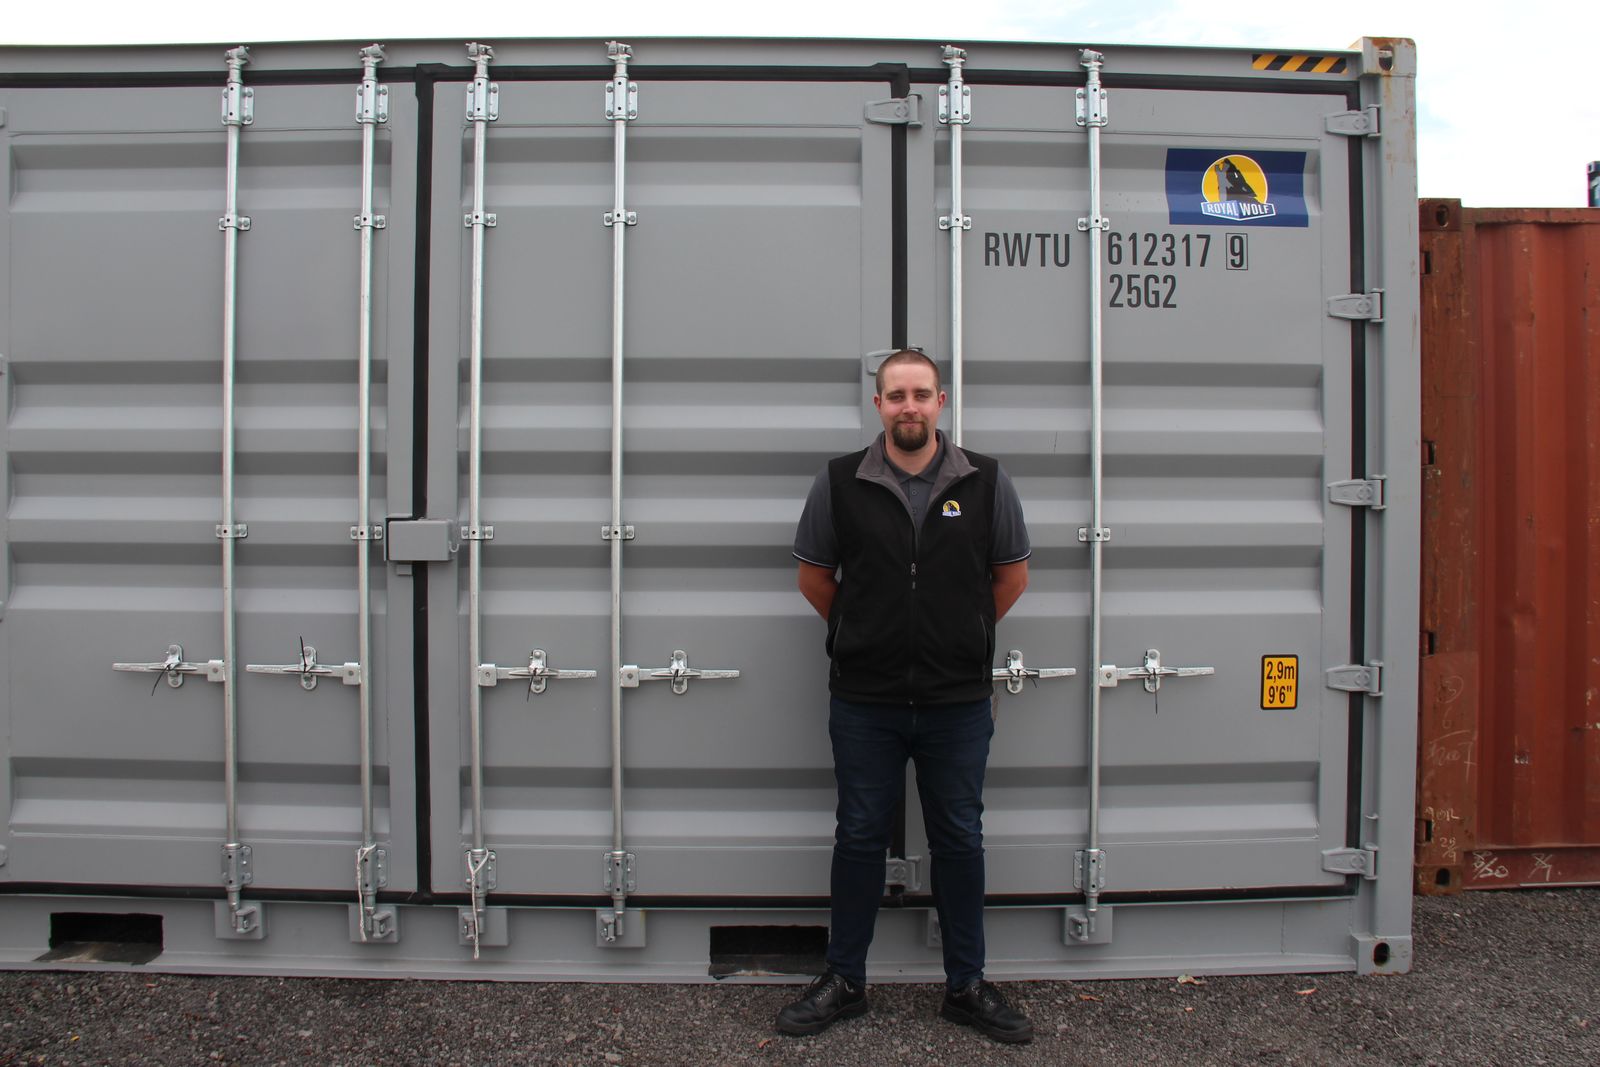 West Auckland branch opens to meet shipping container demand 